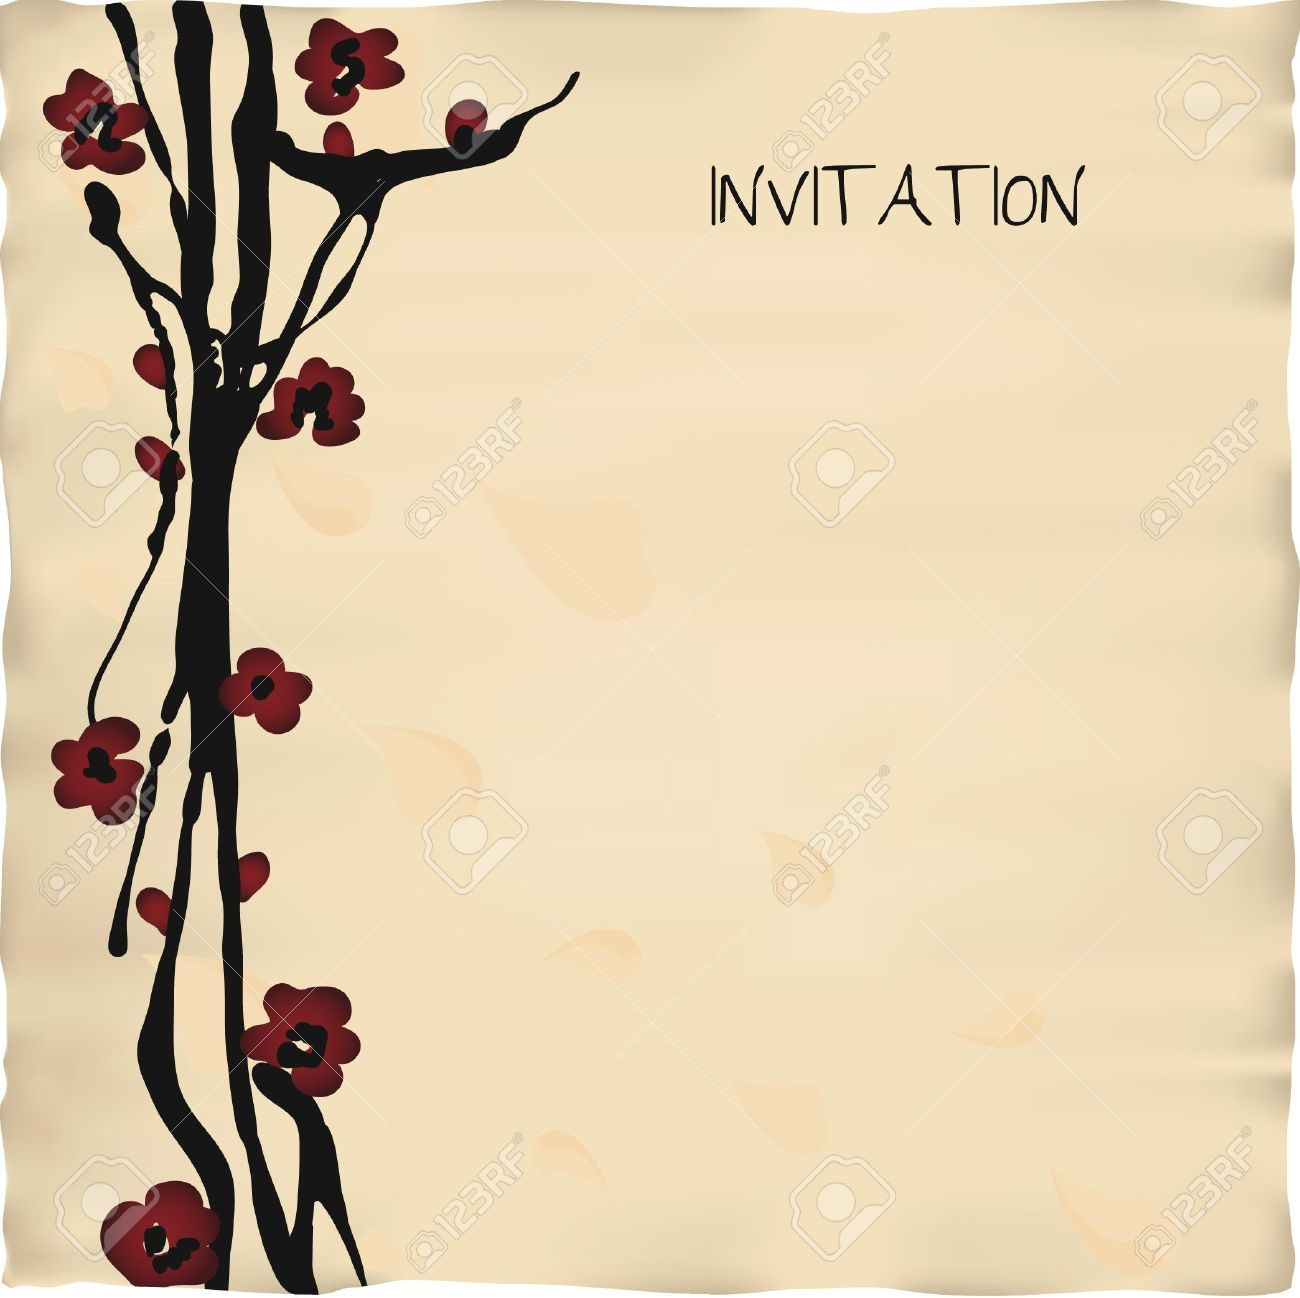 Japanese Or Chinese Style Invitation Card Template Royalty Free intended for dimensions 1300 X 1298